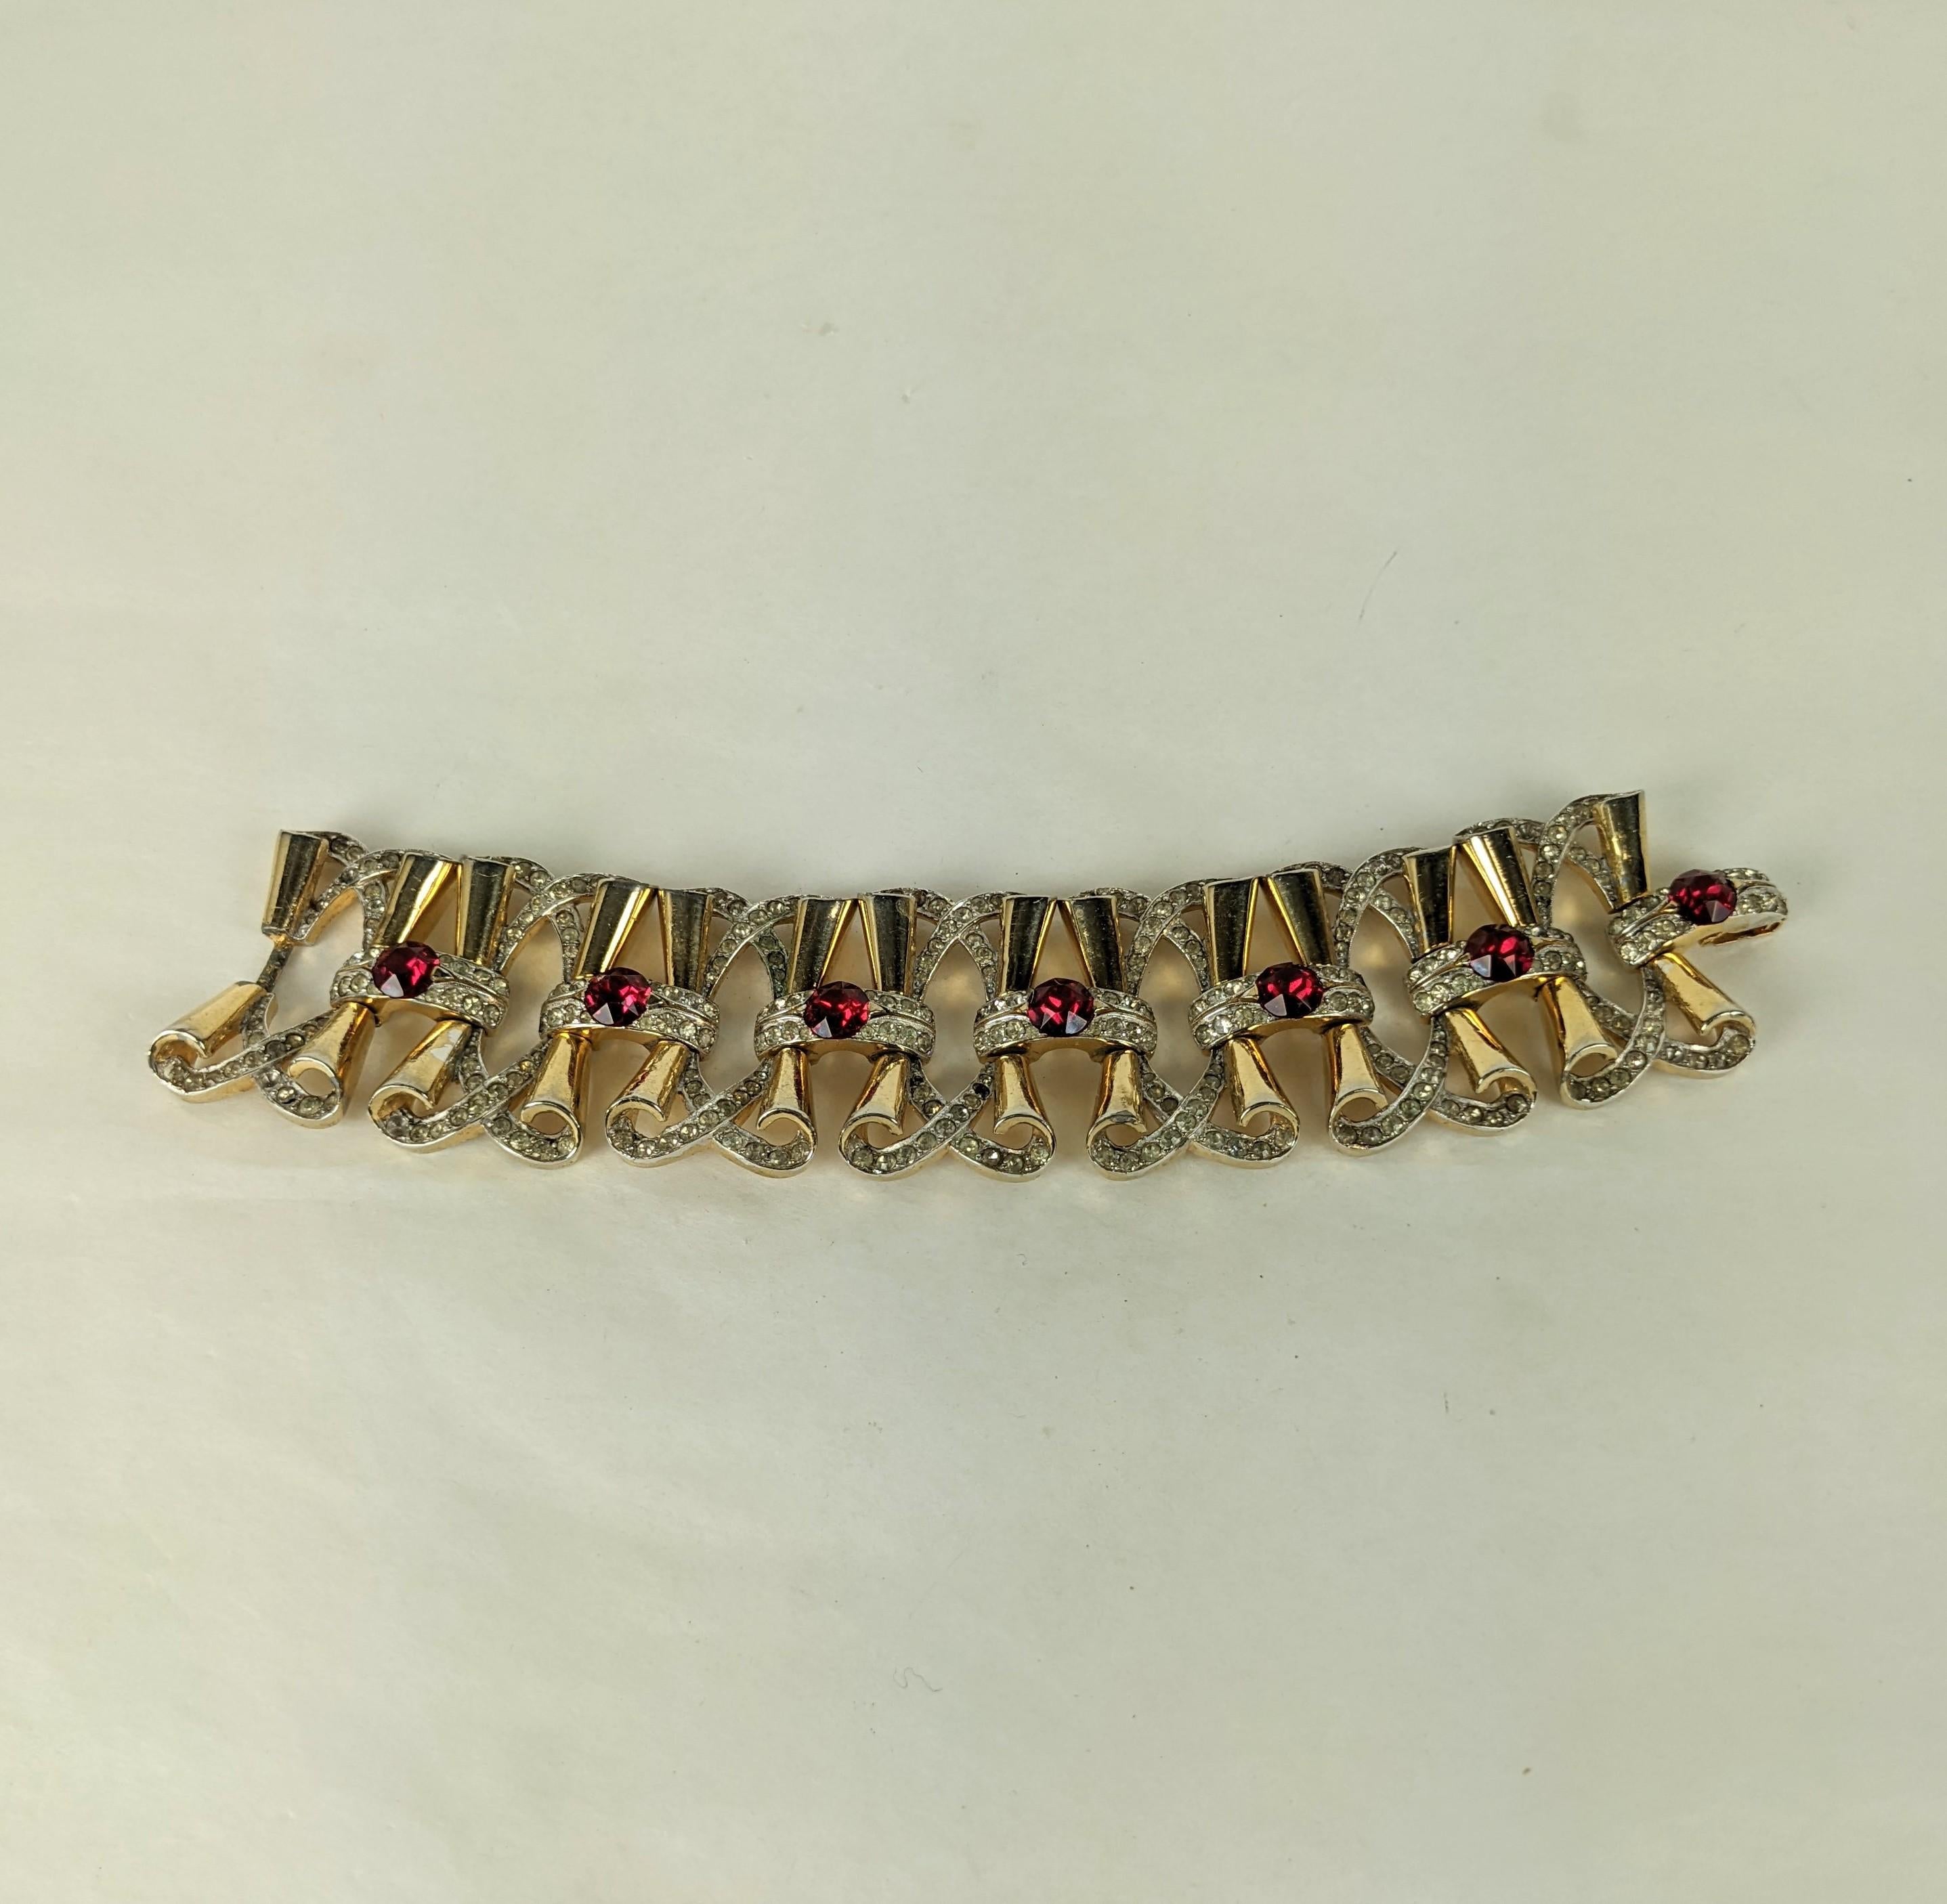 Mazer Retro Wide Link Bracelet In Good Condition For Sale In New York, NY